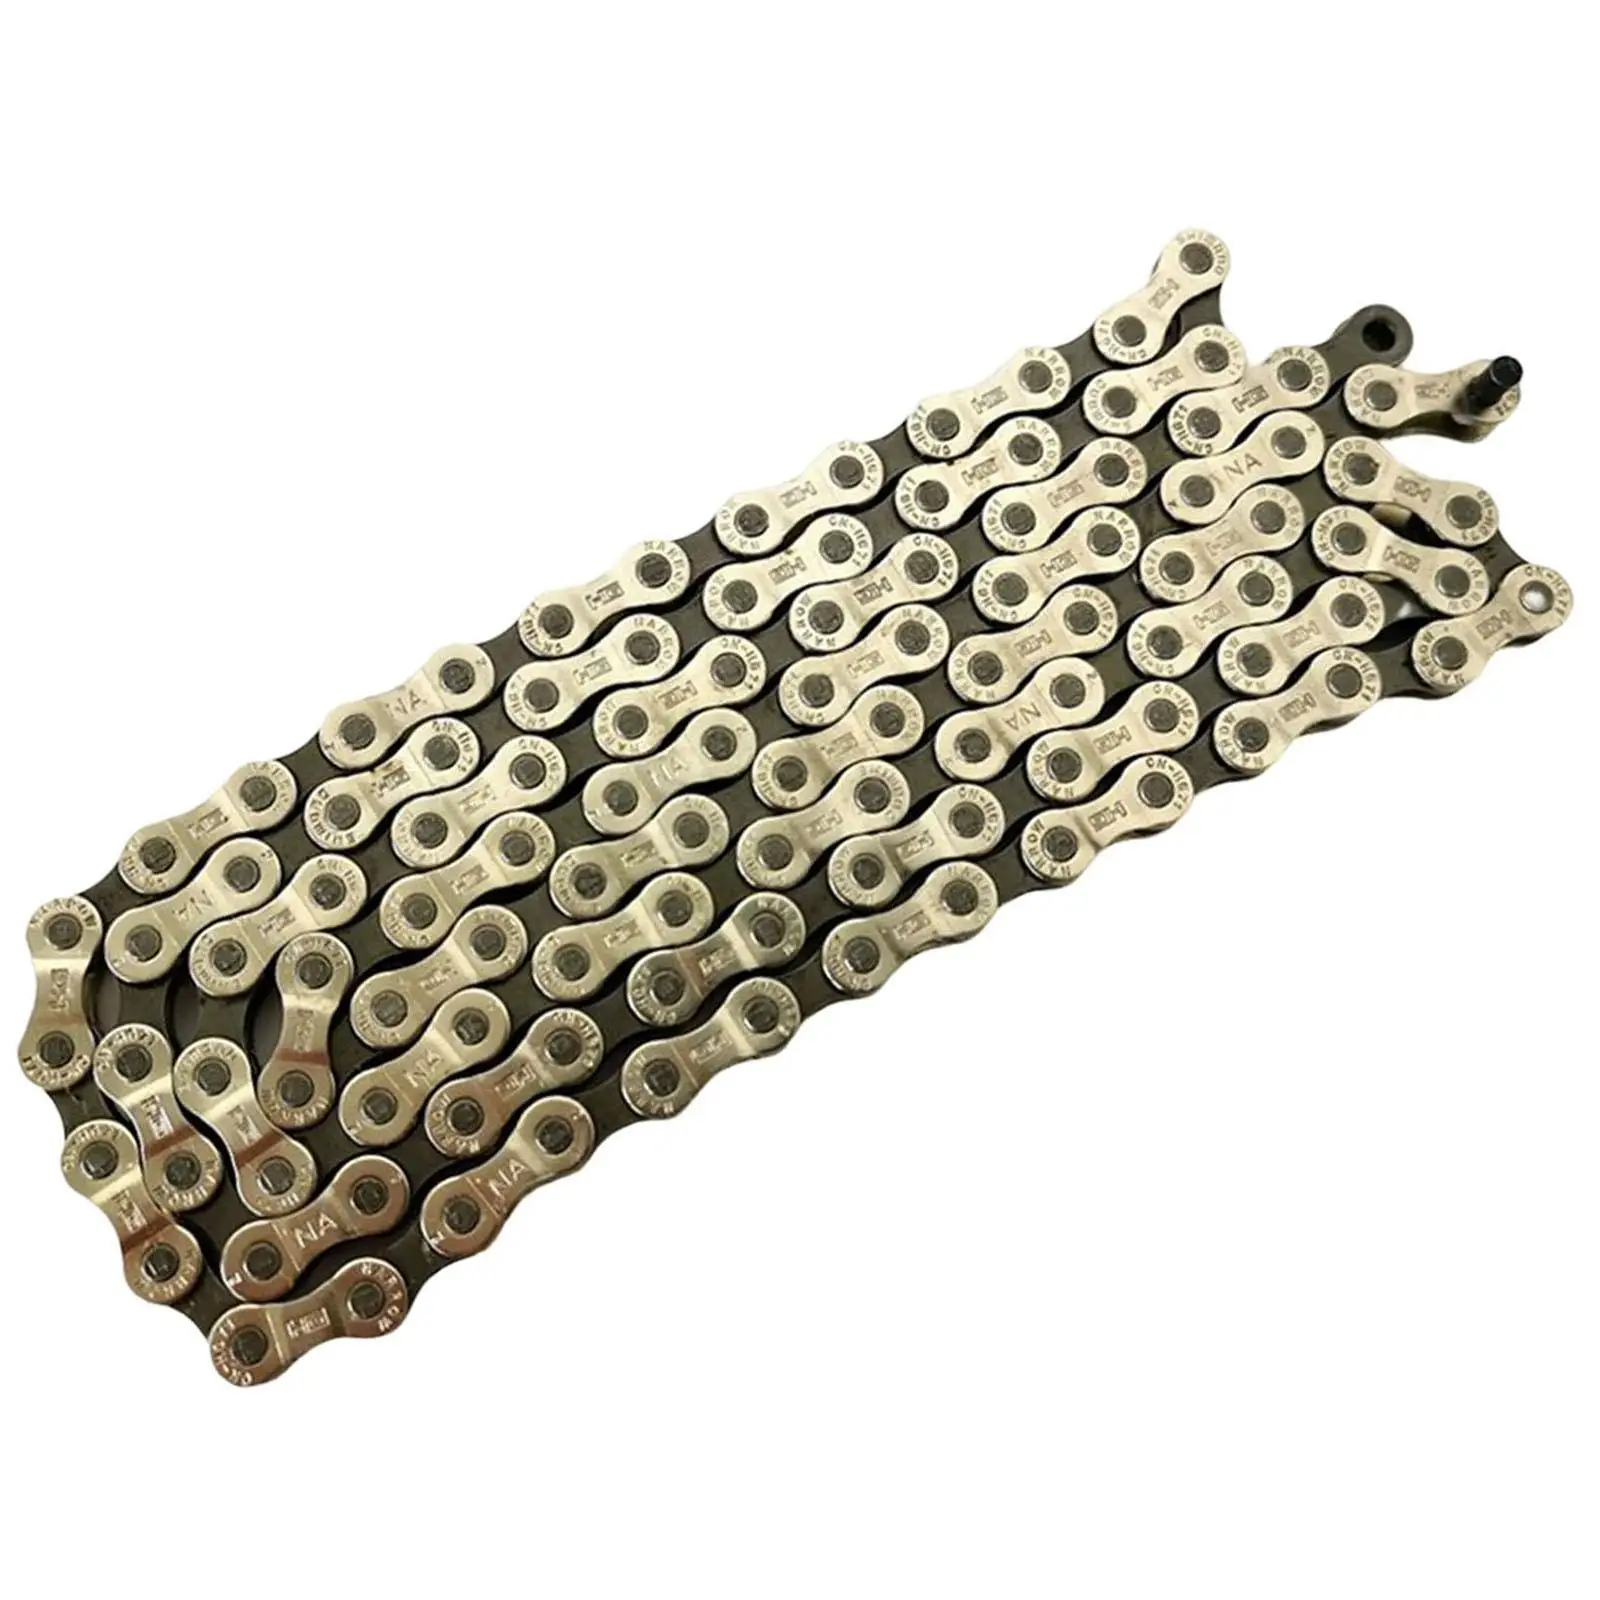 Mountain Road Chain 112L Chain Link Connectors 6/7/8 Speeds Universal